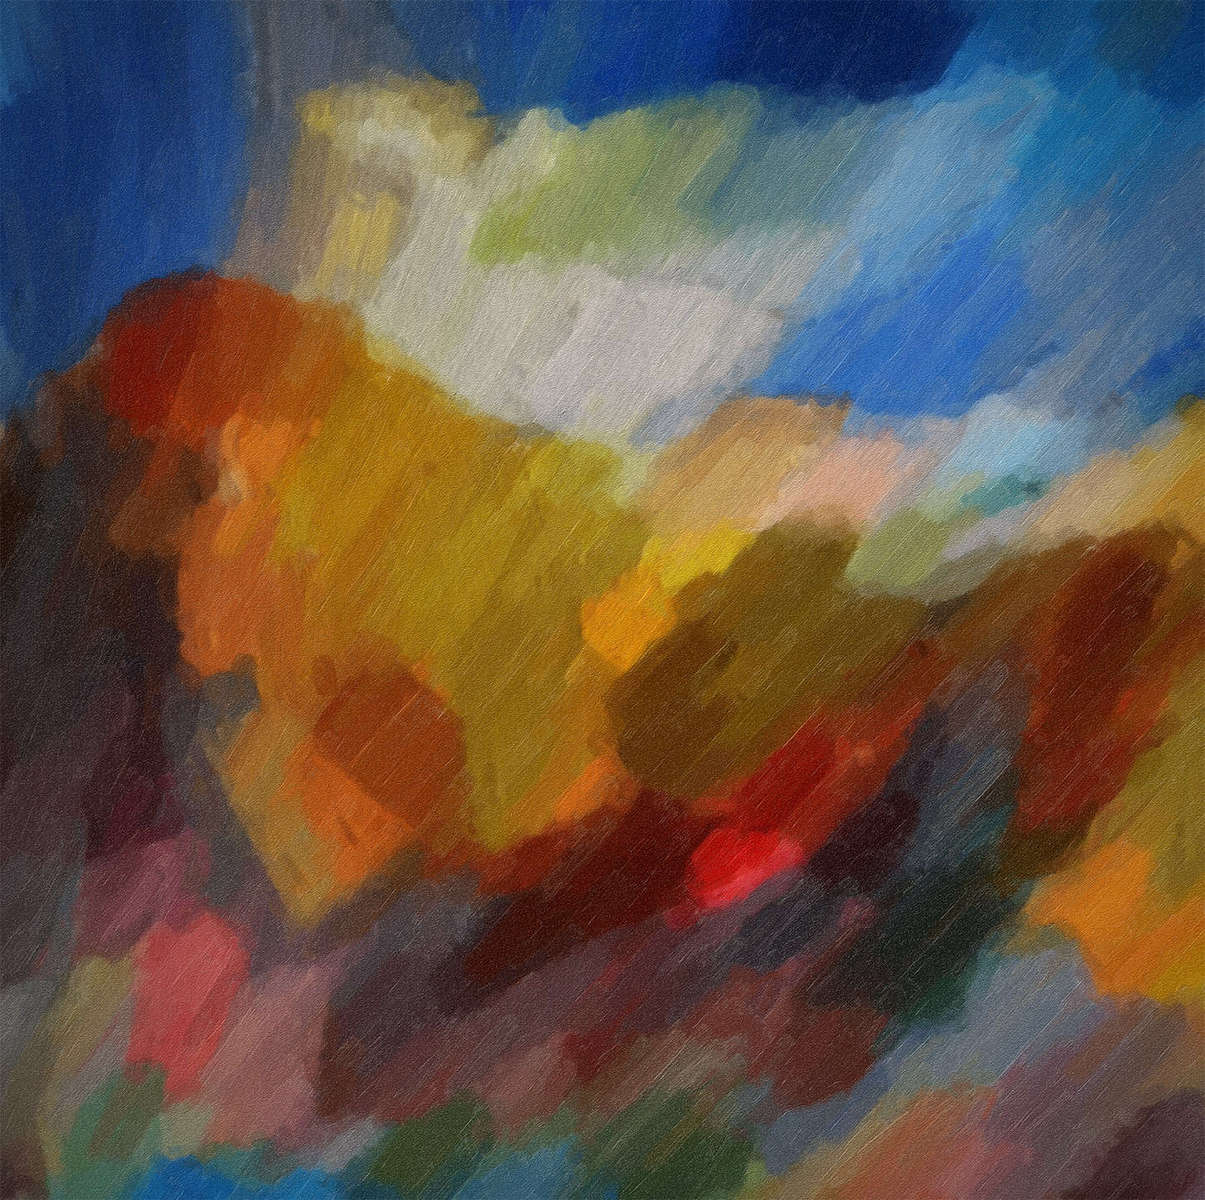 An_Autumn_Mountainscape.jpg : {POL} Picks of the Litter : American artist digital invention archival artifact color print image emerging capture creative convergent transparency universe dream history painter Hybrid exhibition